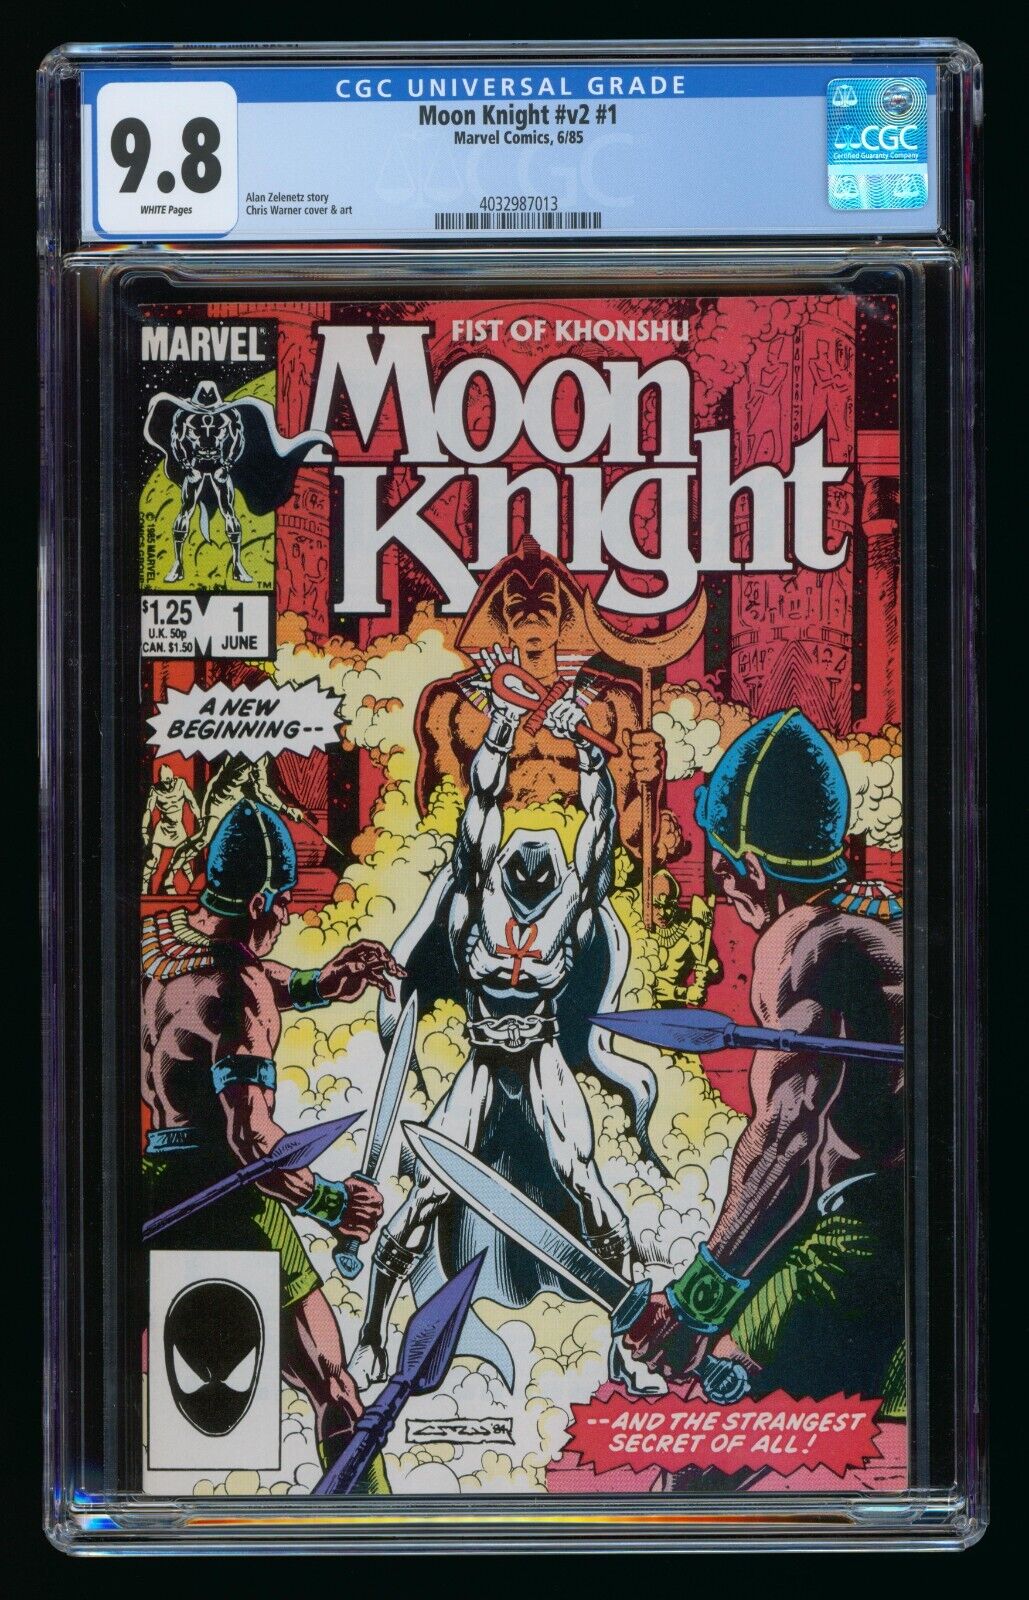 MOON KNIGHT #V2 #1 (1985) CGC 9.8 WHITE PAGES